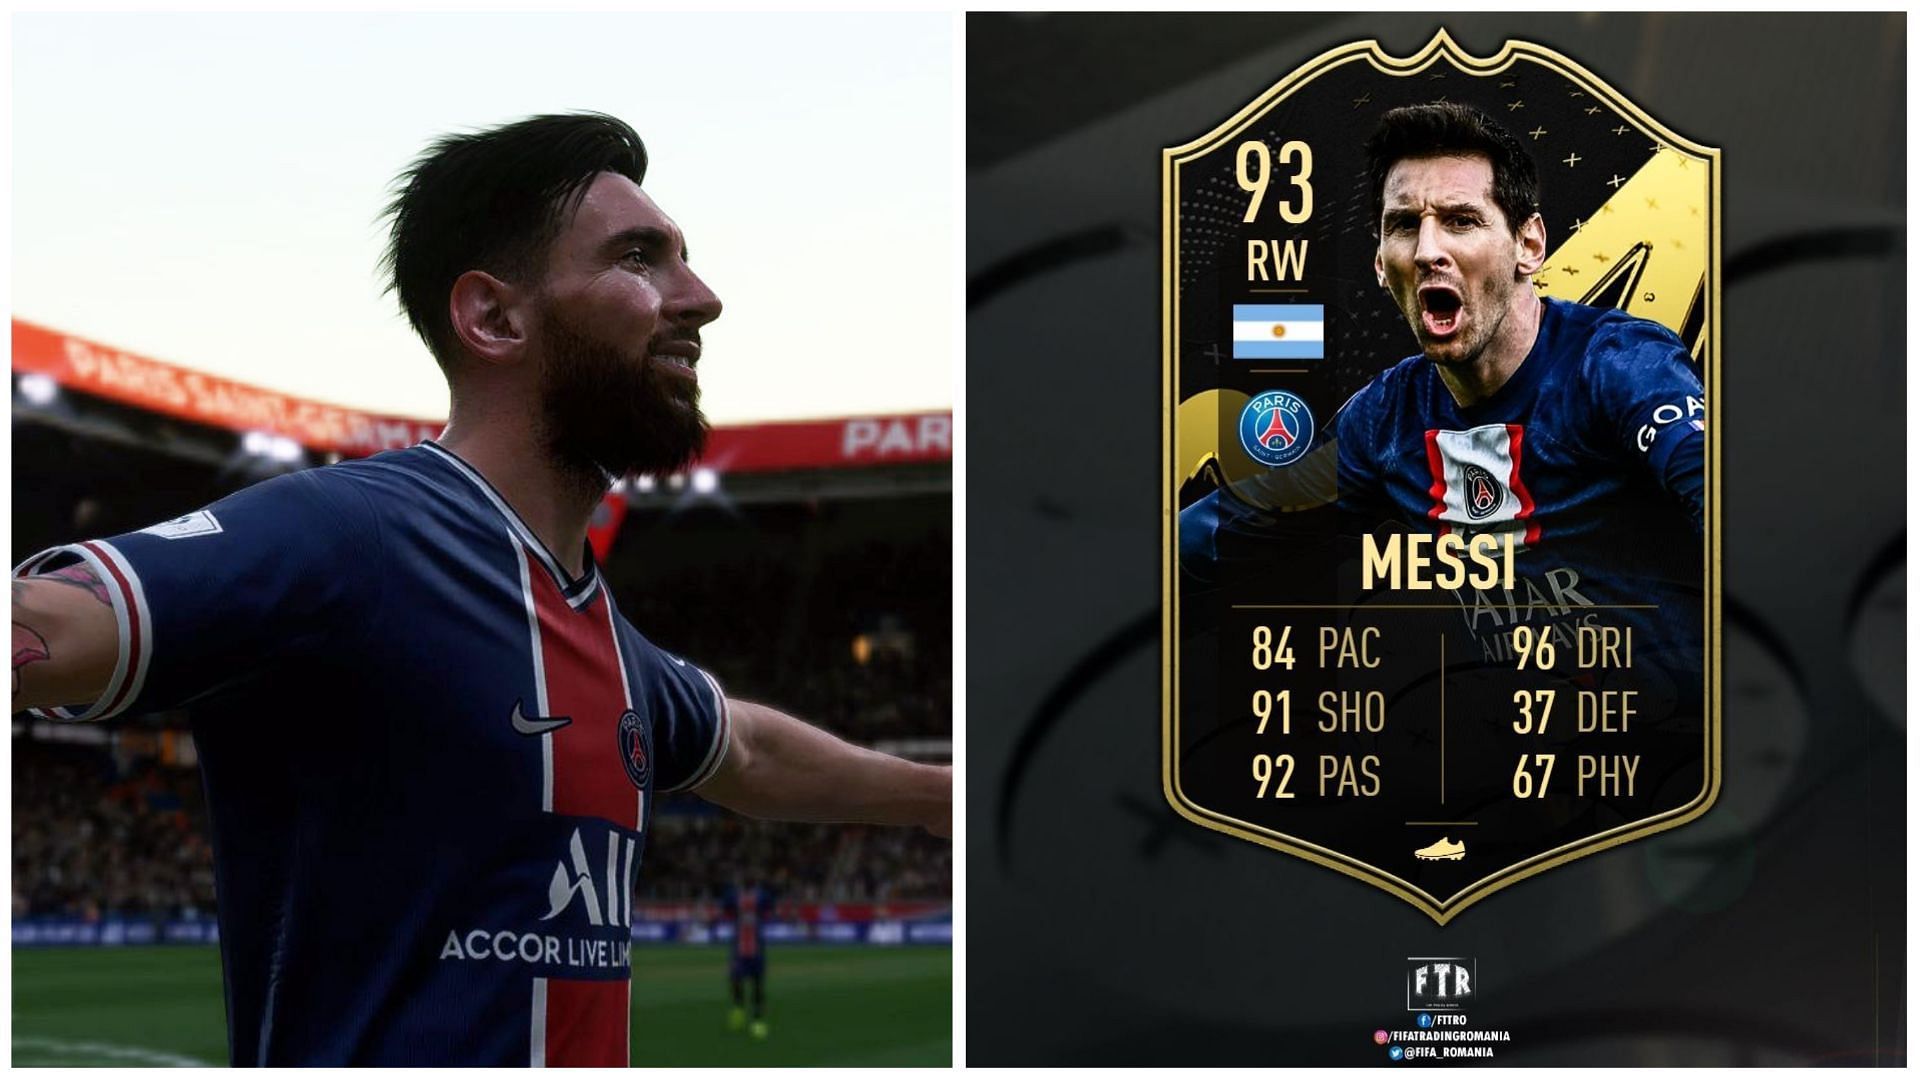 Lionel Messi is rumored to receive an in-form card (Images via EA Sports and Twitter/FIFATradingRomania)